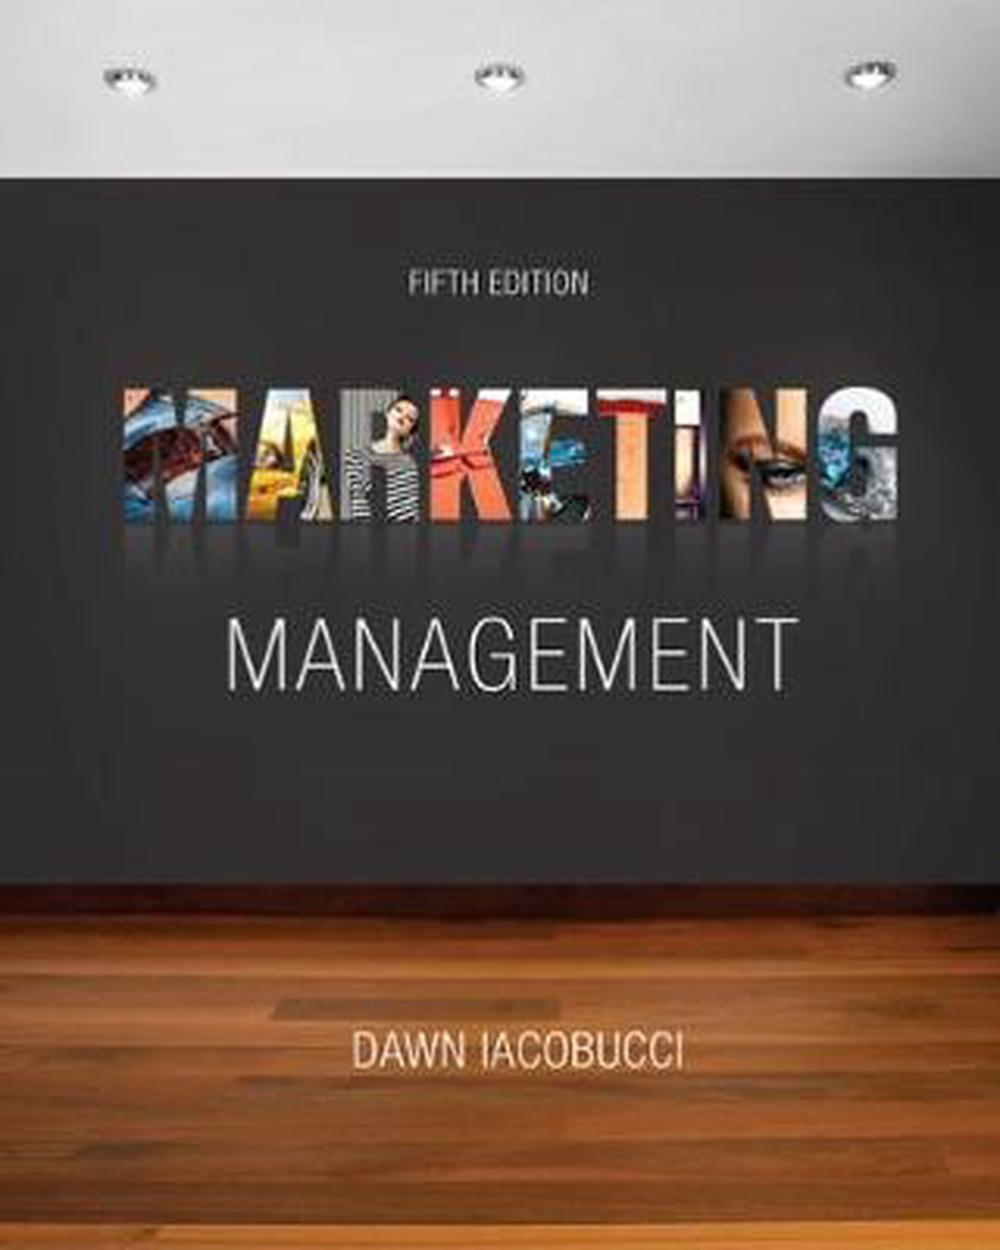 Marketing Management 5th Edition by Dawn Iacobucci (English) Paperback ...